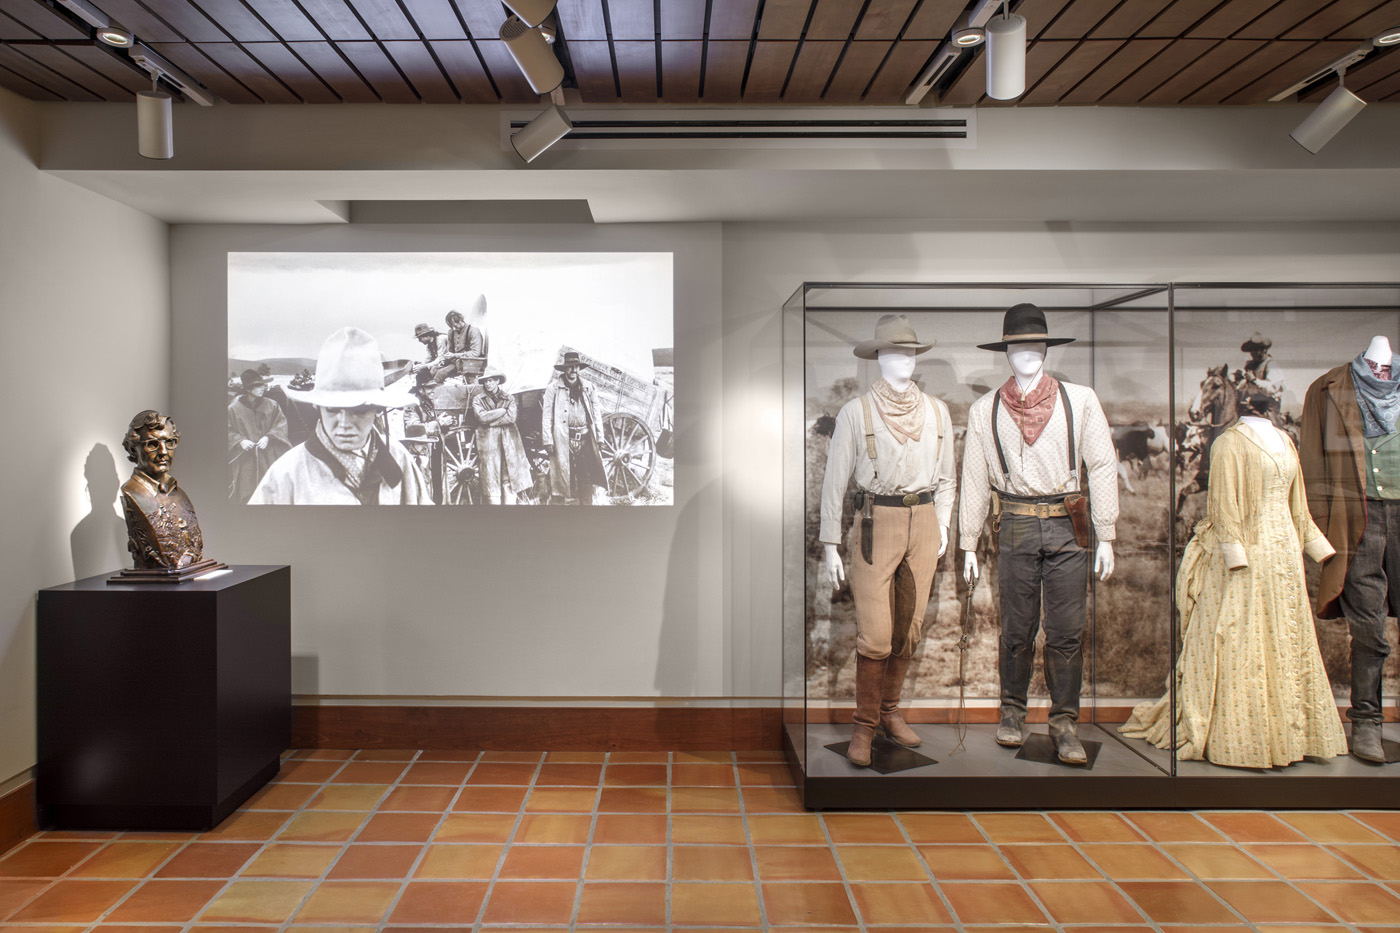 Maniquis in western attire behind glass display cases with a black and white film being displayed on wall.